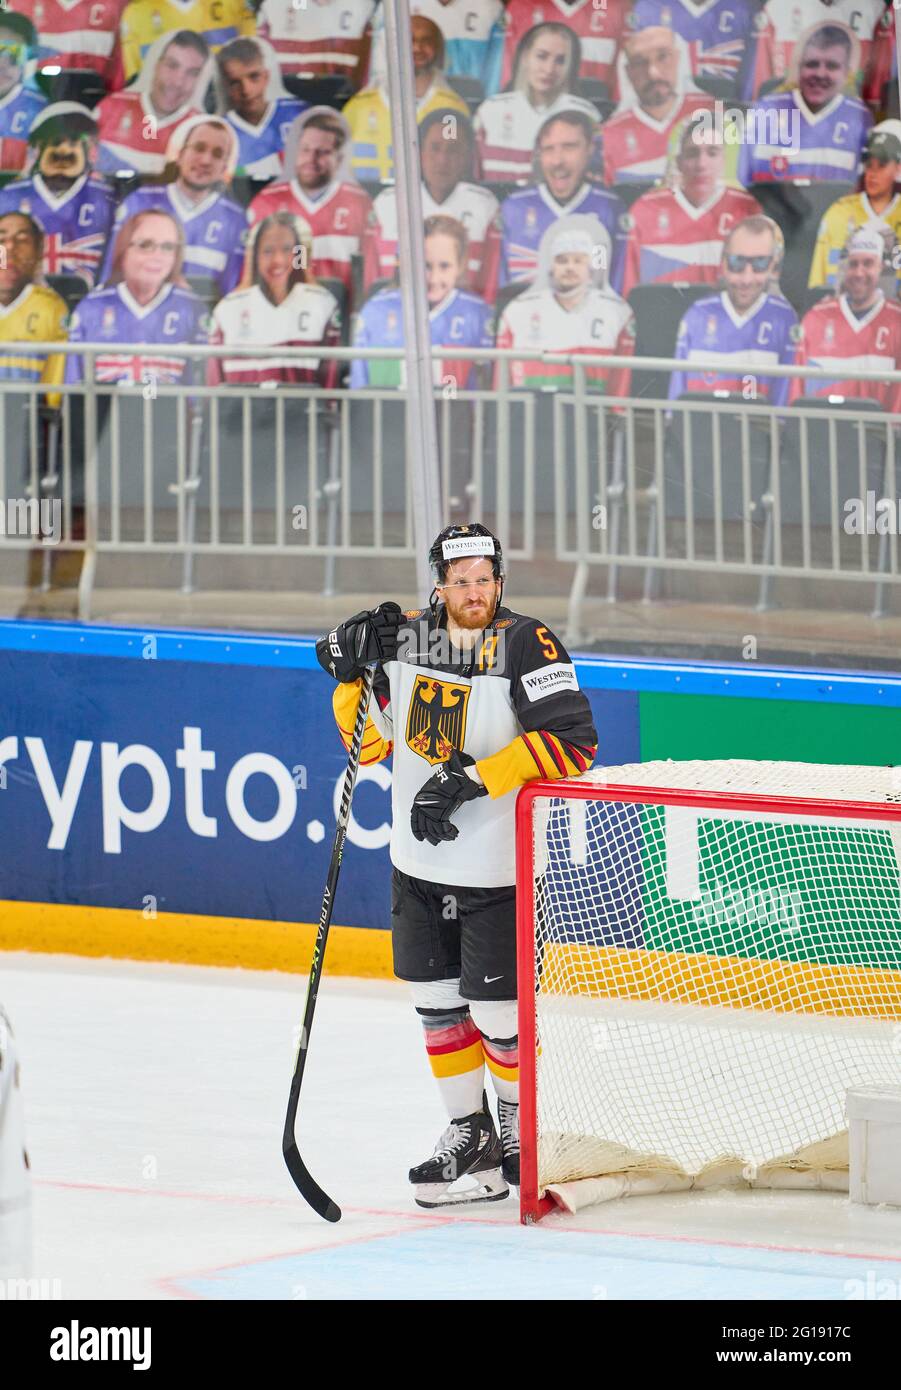 Team Germany disappointed after the match, Korbinian Holzer #5 of Germany  GERMANY - FINLAND 1-2 IIHF ICE HOCKEY WORLD CHAMPIONSHIPS Semifinal in Riga, Latvia, Lettland, June 5, 2021,  Season 2020/2021 © Peter Schatz / Alamy Live News Stock Photo